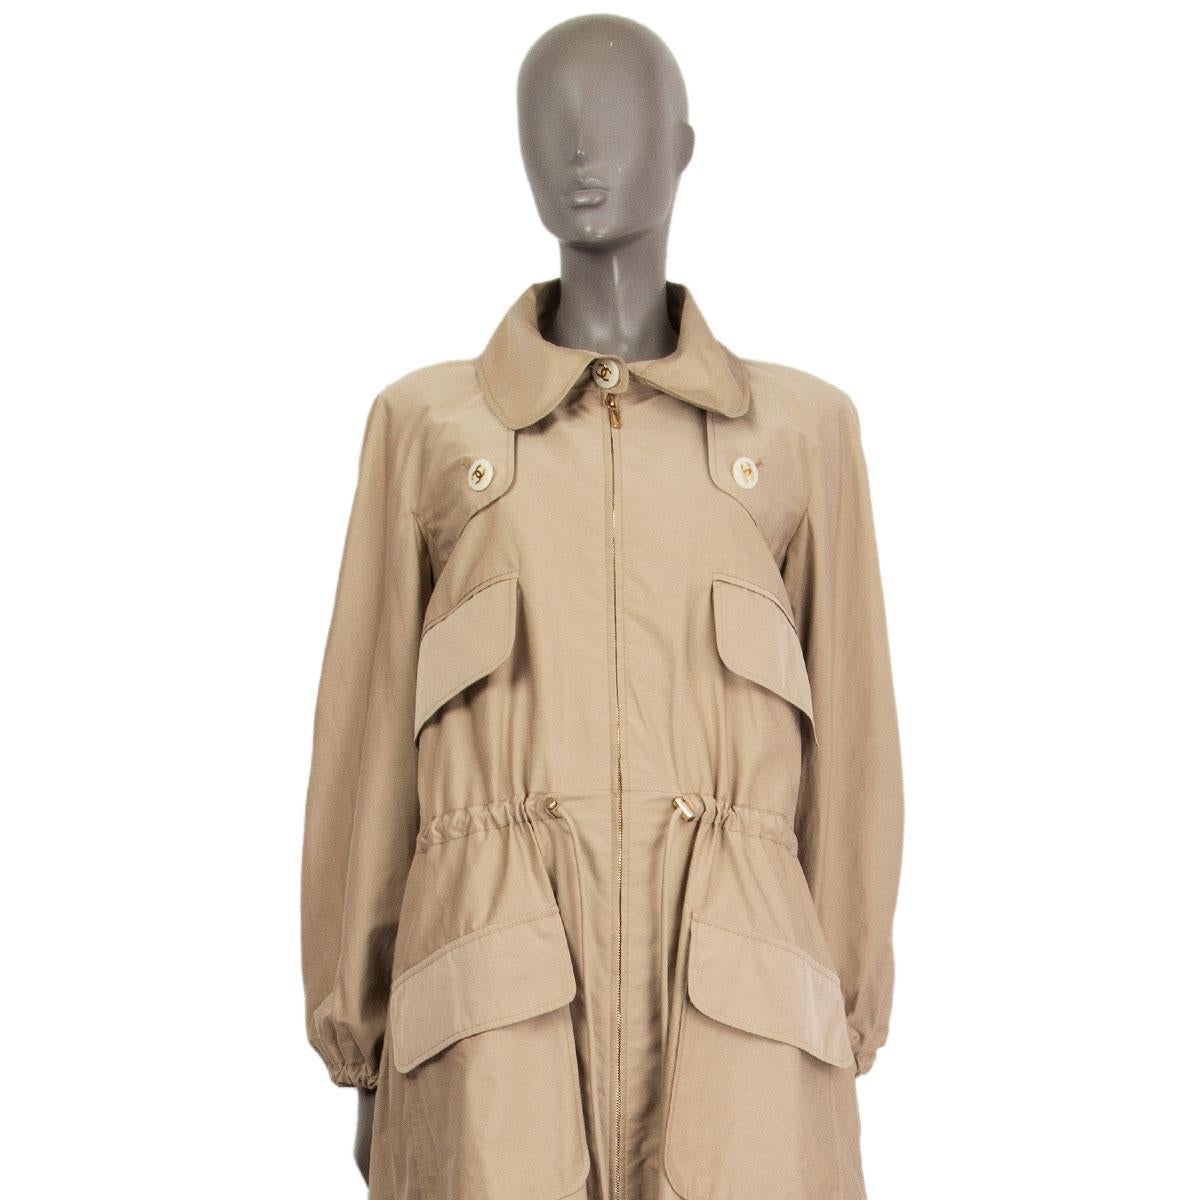 100% authentic Chanel Pre-Fall 2018 collection drawstring trench coat in beige cotton (82%) and silk (18%) with logo embossed buttoned storm flap at the front and at the back, four flap pockets at the front and drawstring at the sleeve-hems. Closes